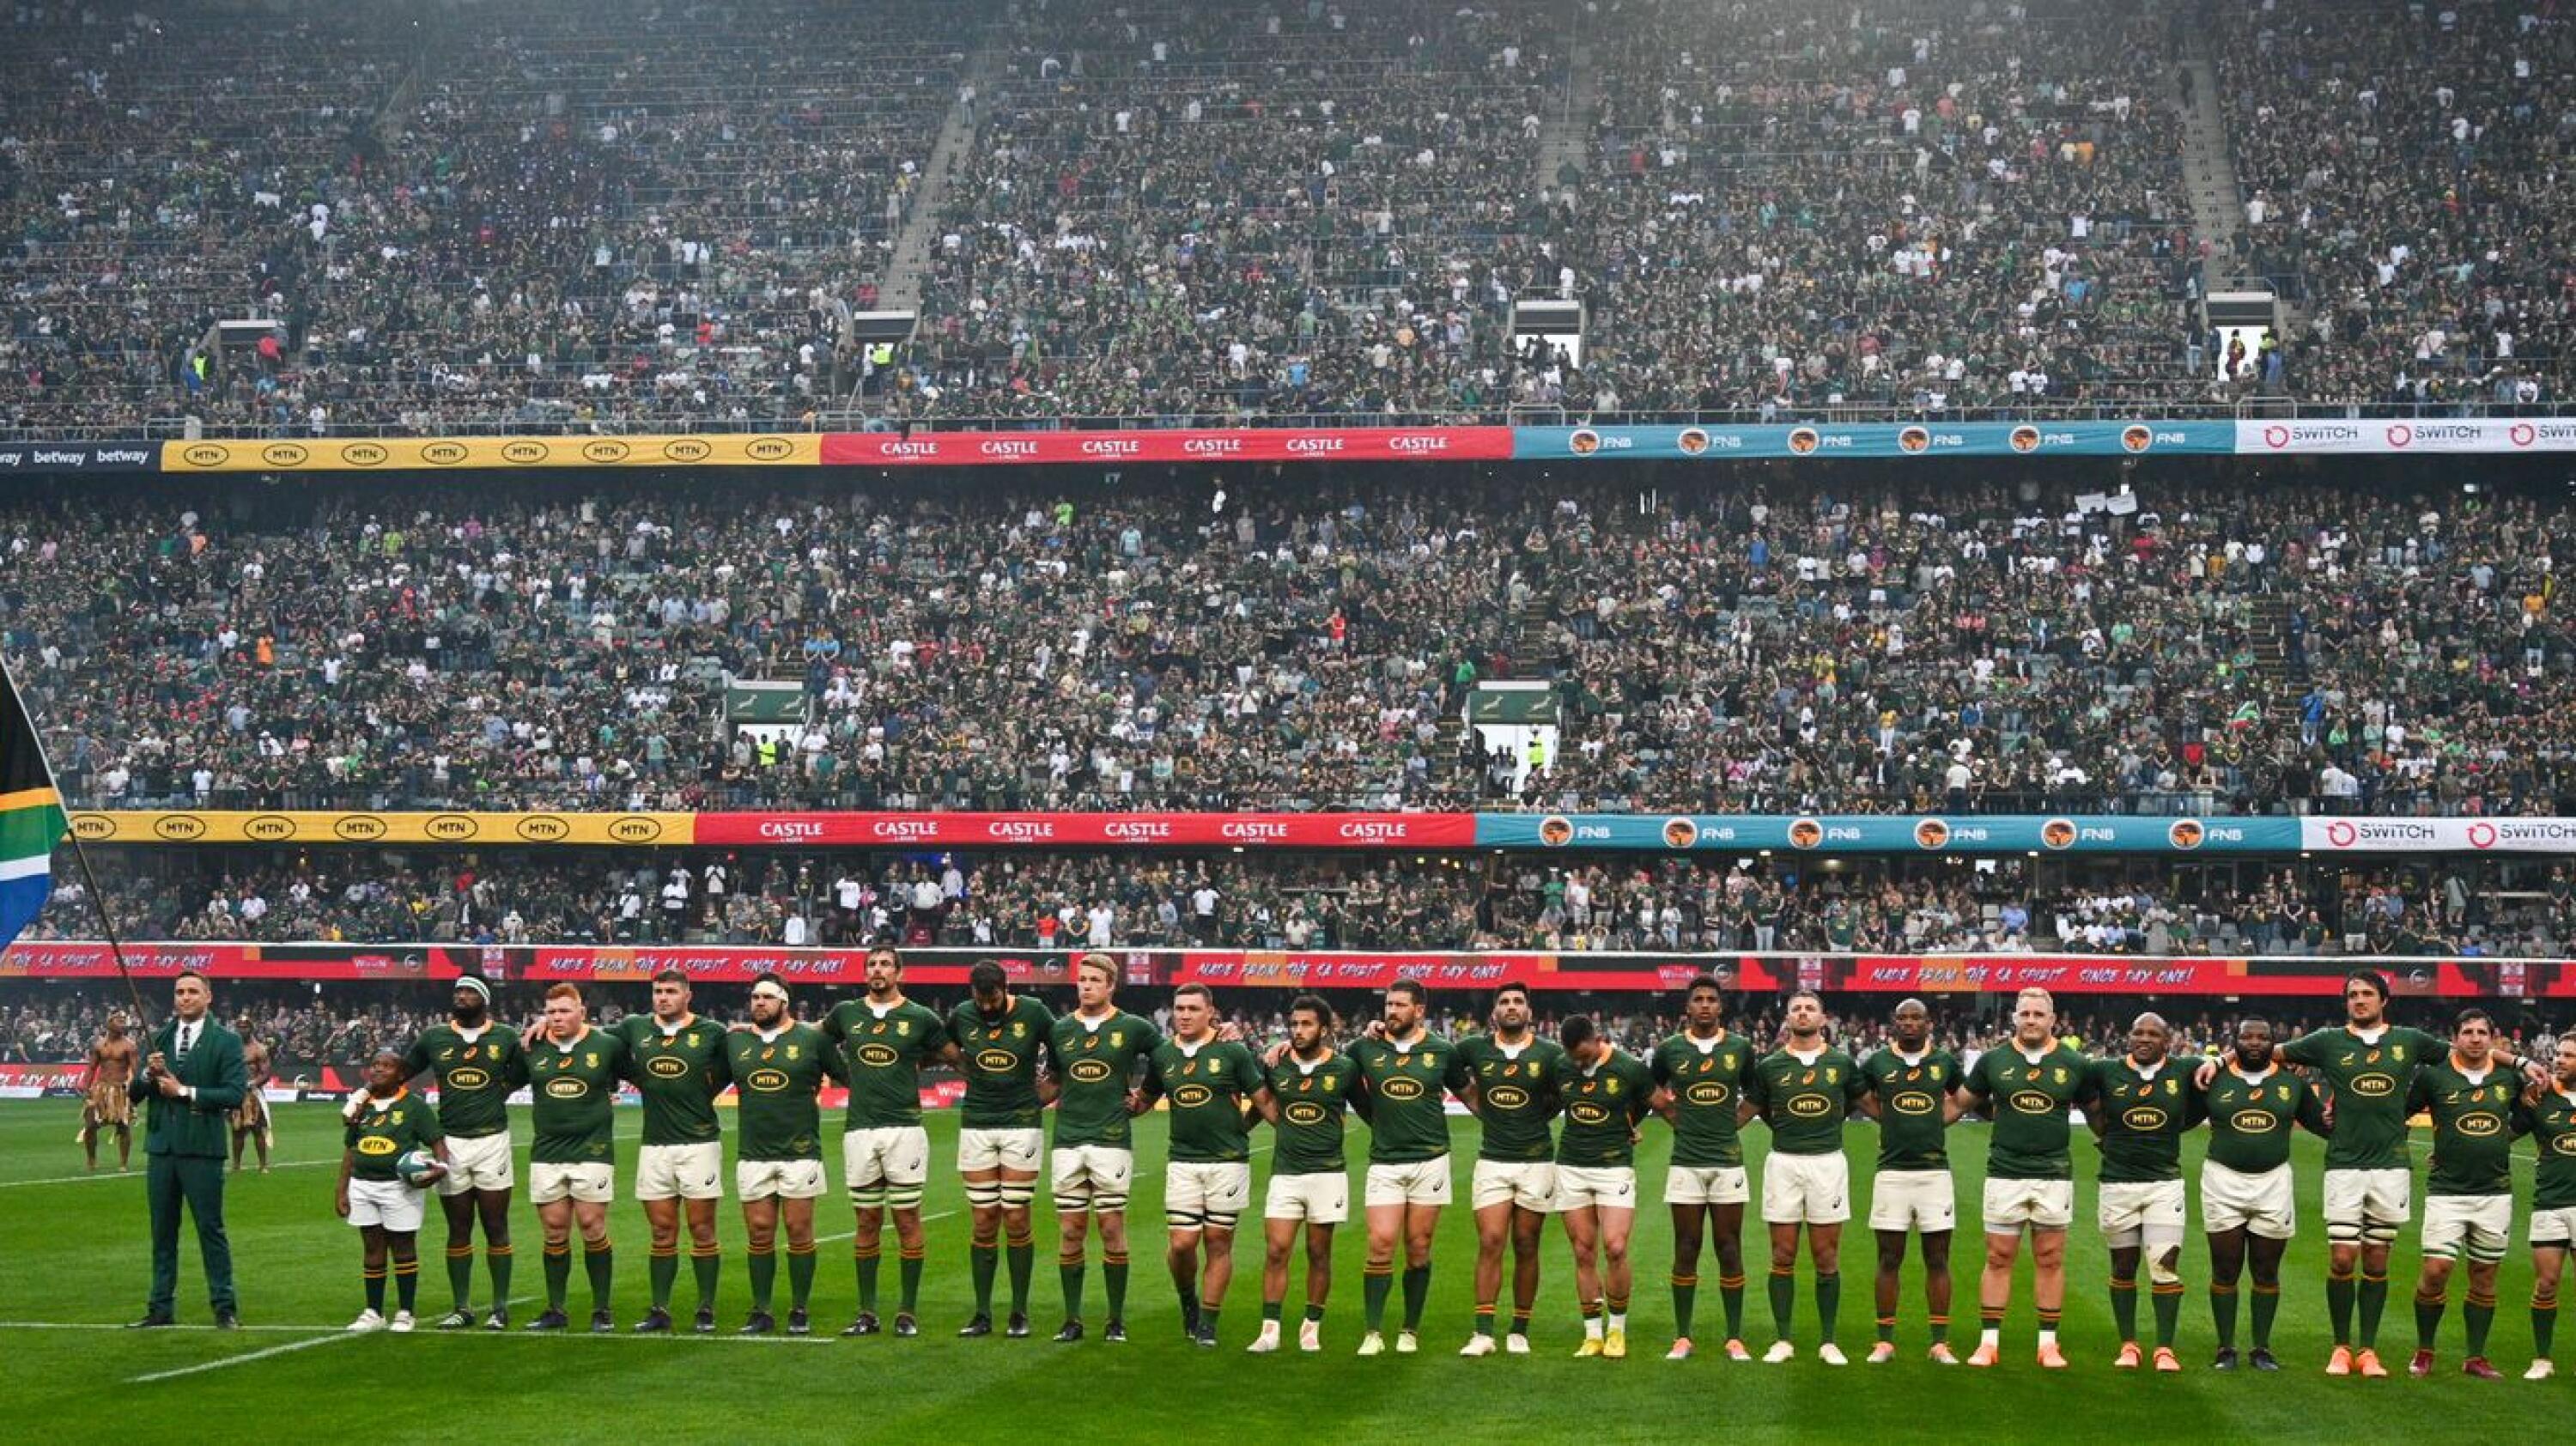 The Springbok team line up for national anthems during the 2022 Castle Lager Rugby Championship match between South Africa and Argentina held at Kings Park in Durban